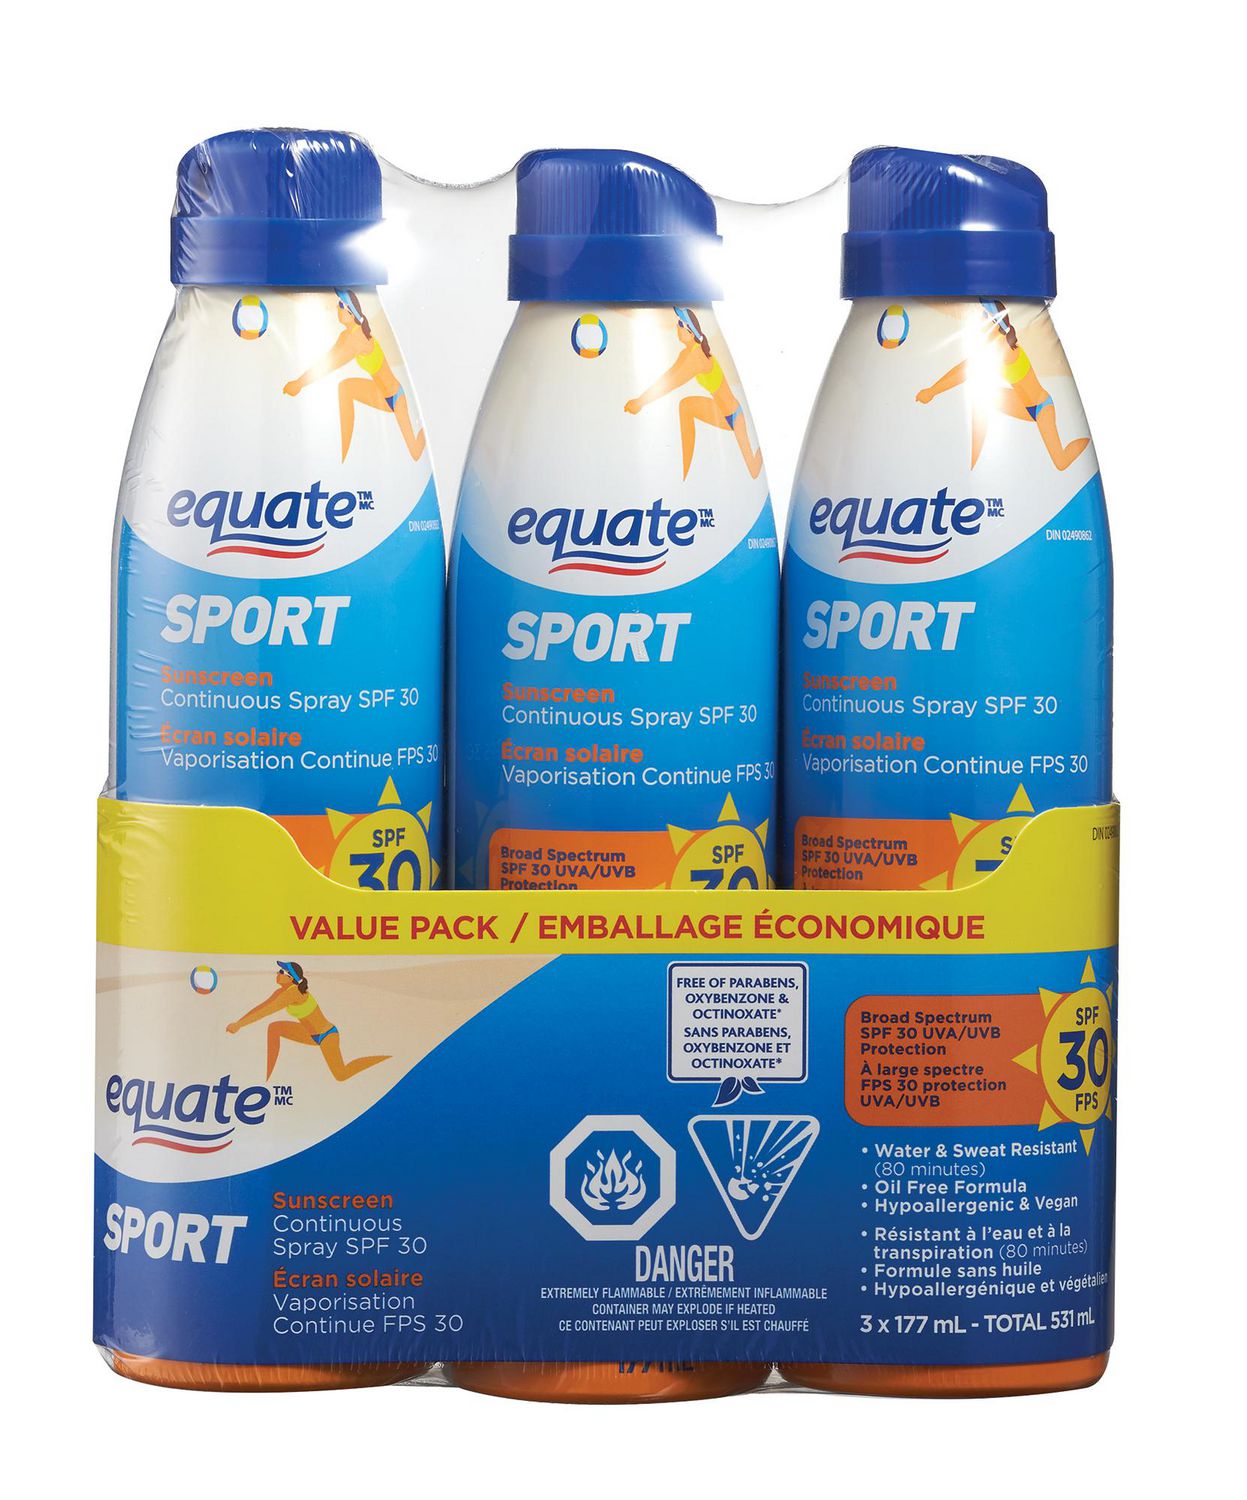 Equate Sport SPF 30 Continuous Spray Sunscreen, 3x177mL 